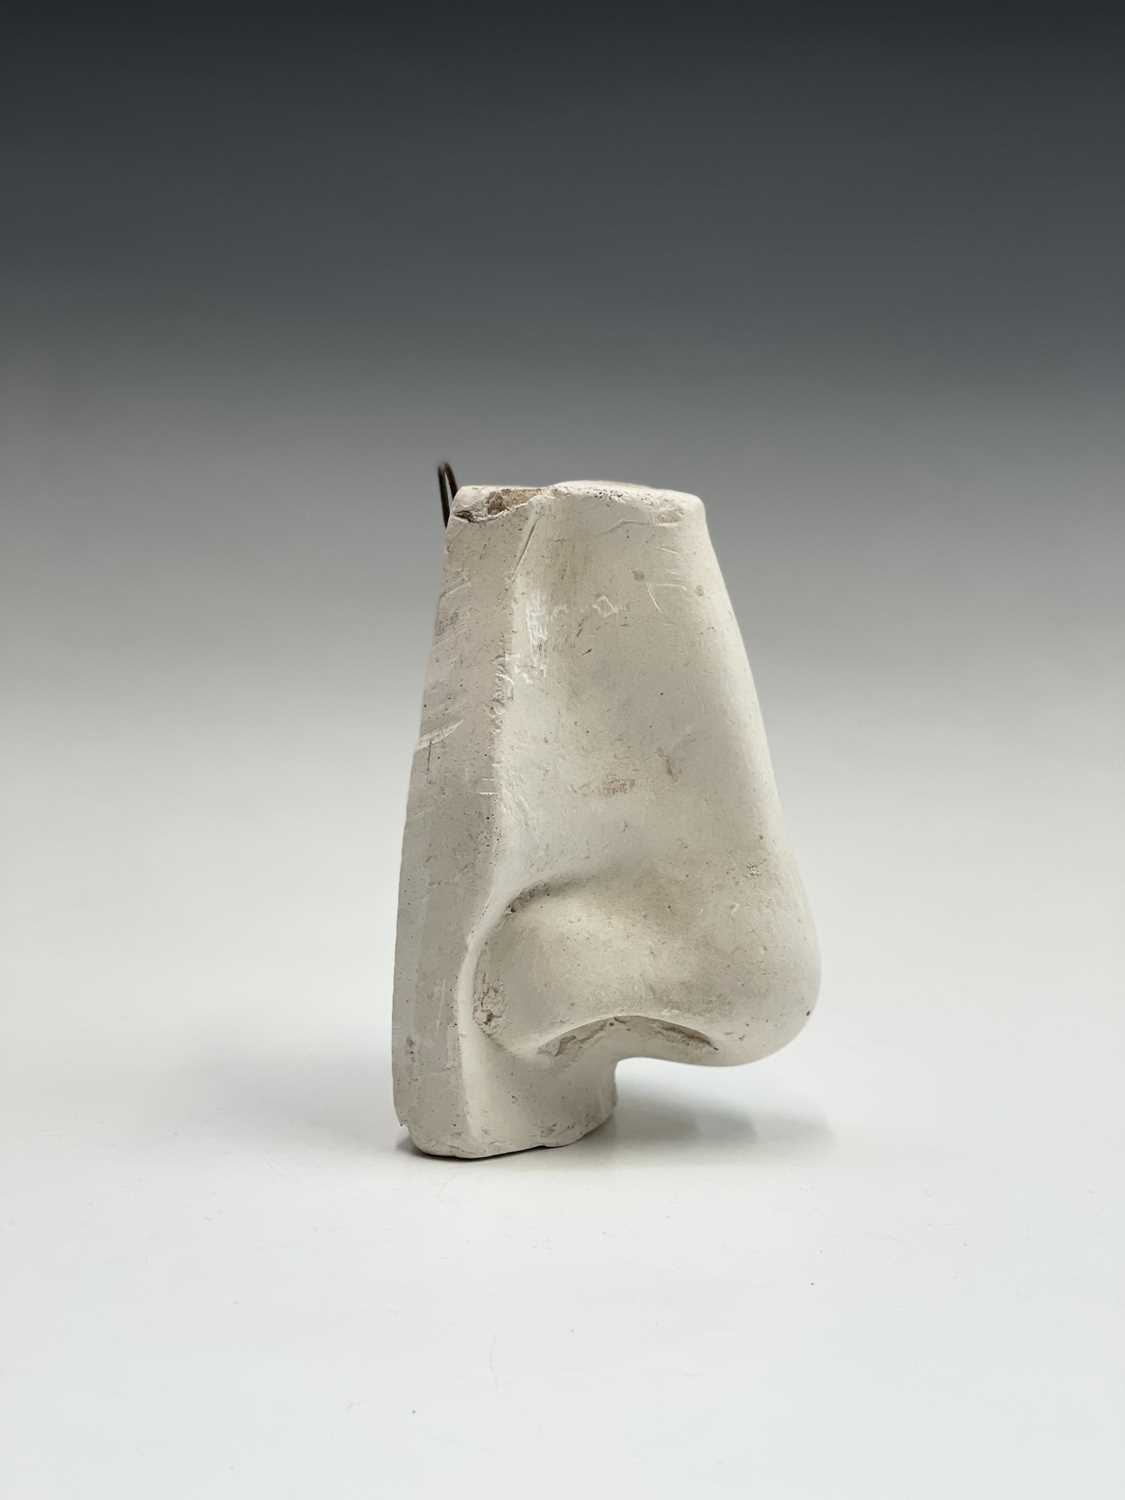 Two plaster moulds, one of an eye the other a noseFrom the estate of Alec Wiles - Image 7 of 12